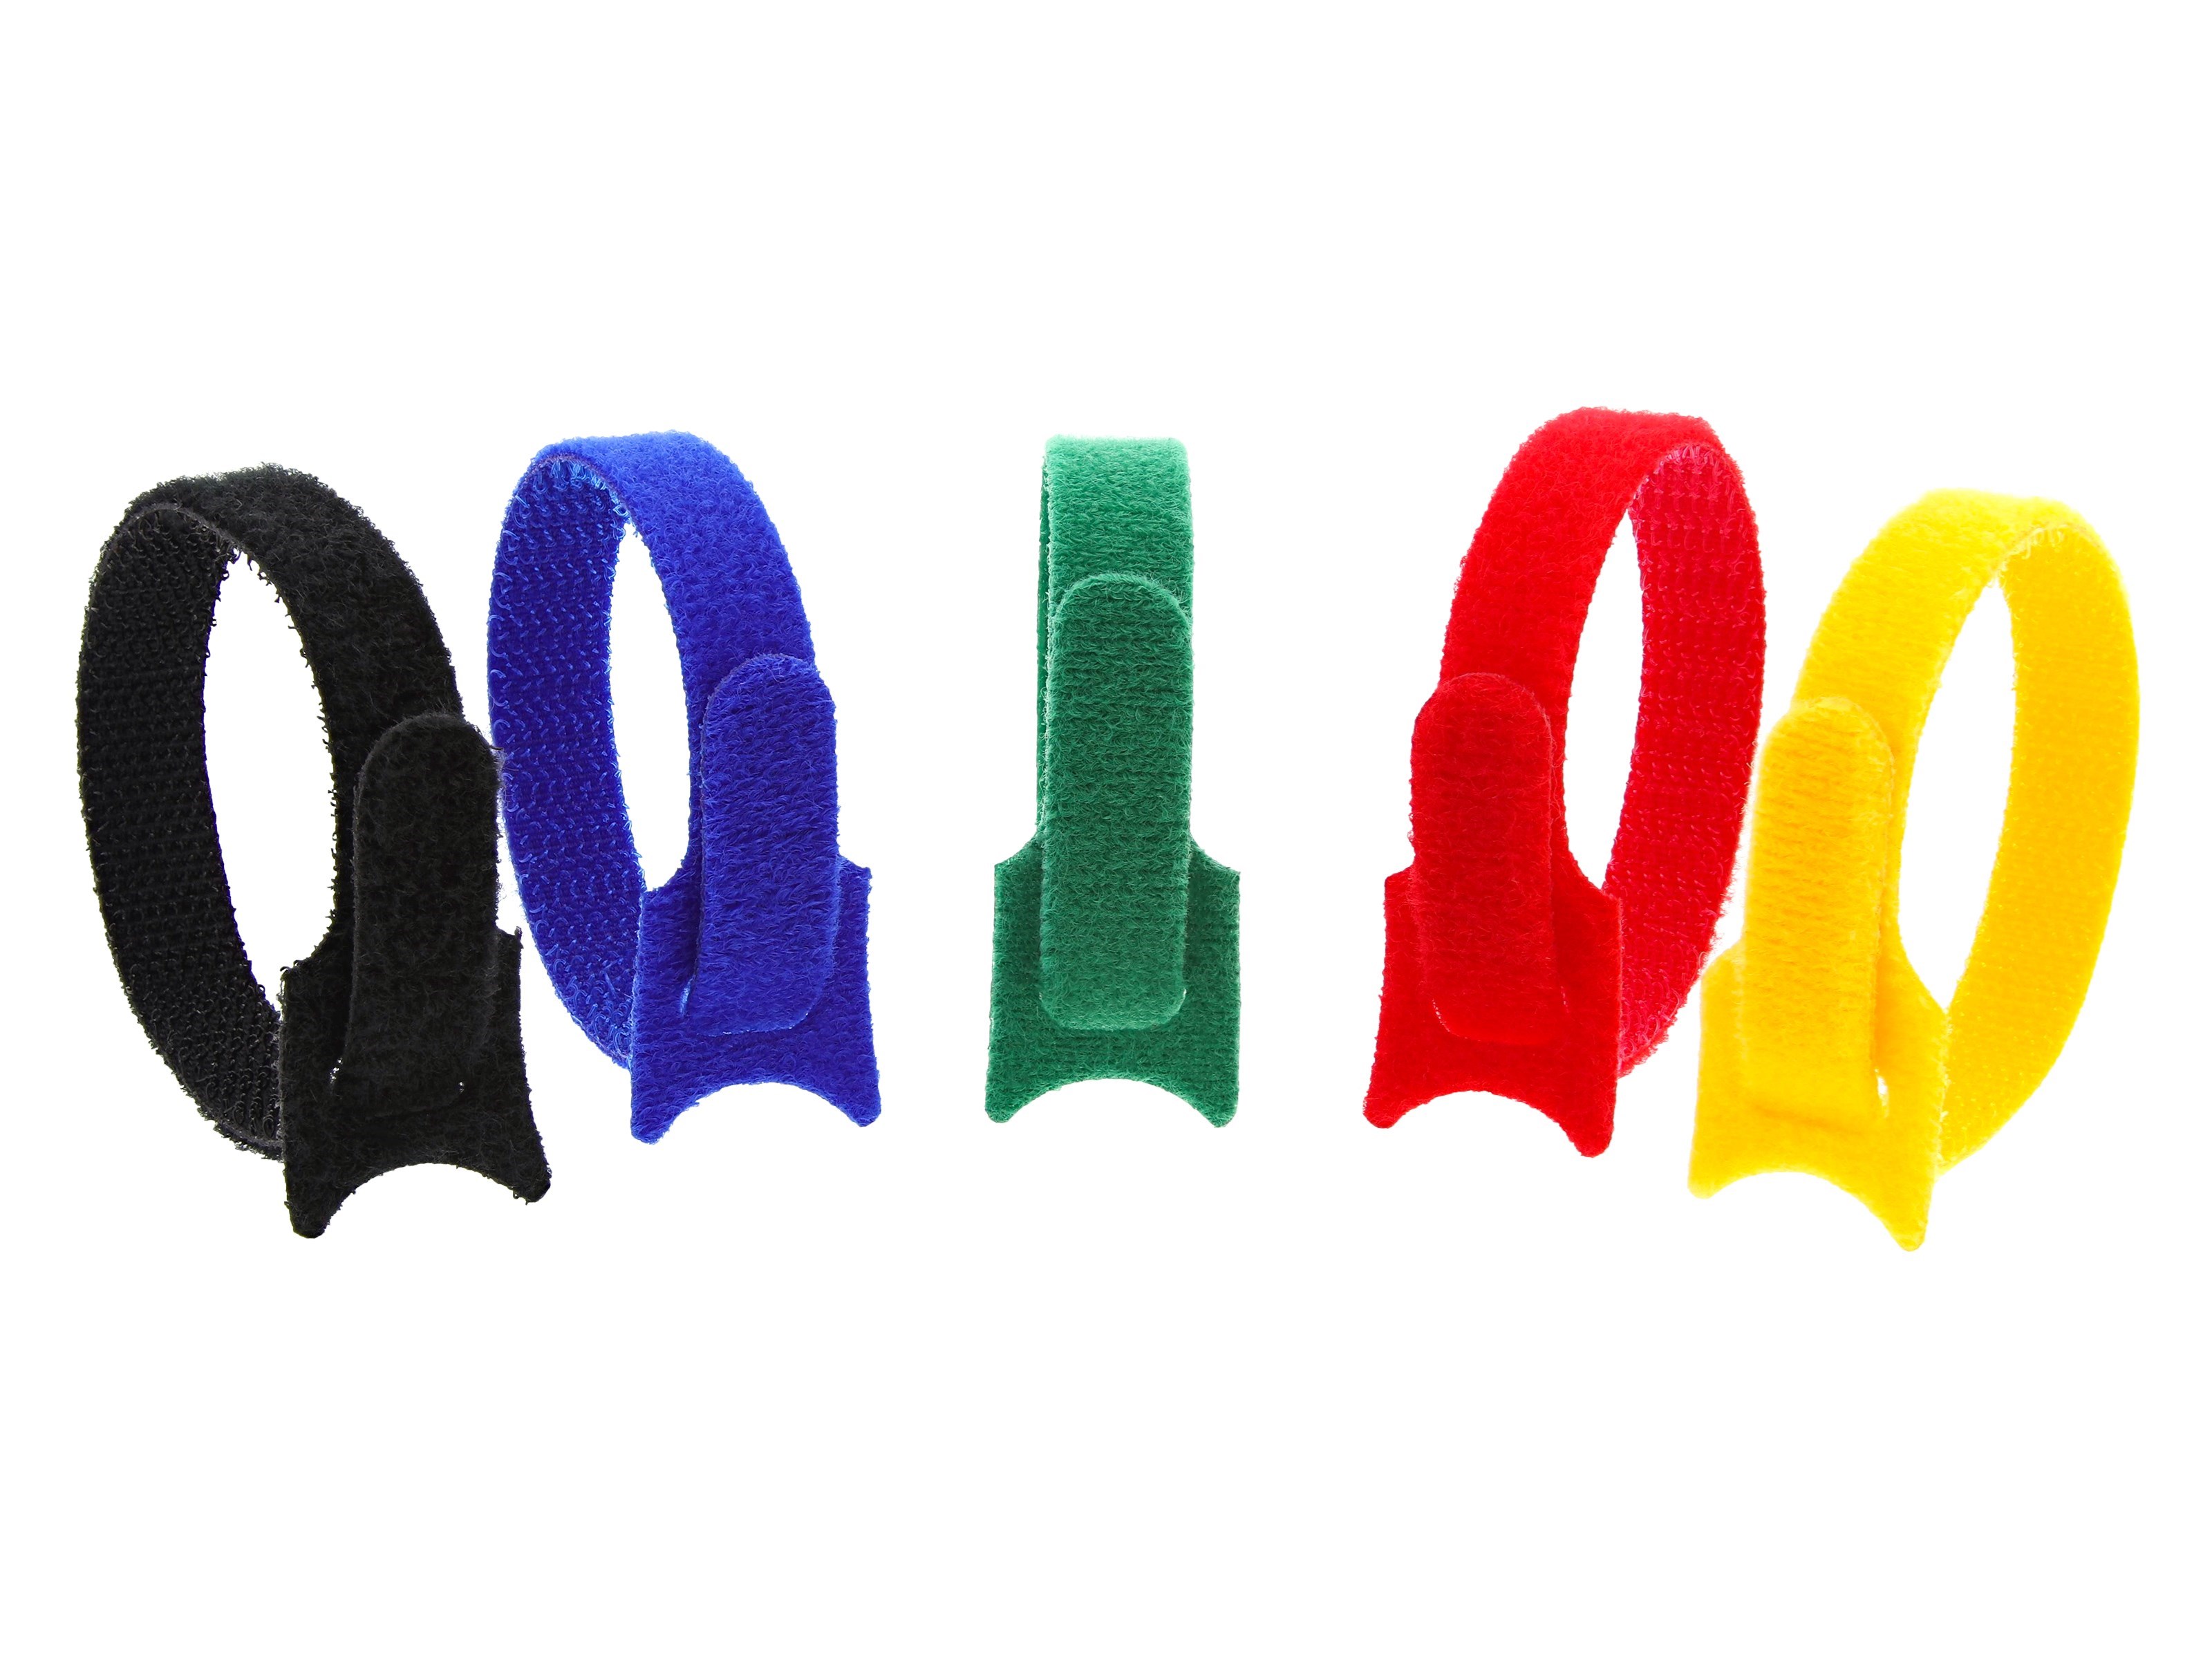 8 Inch Multi-colored Reuseable Tie Wraps - 50 Pack - Secure™ Cable Ties